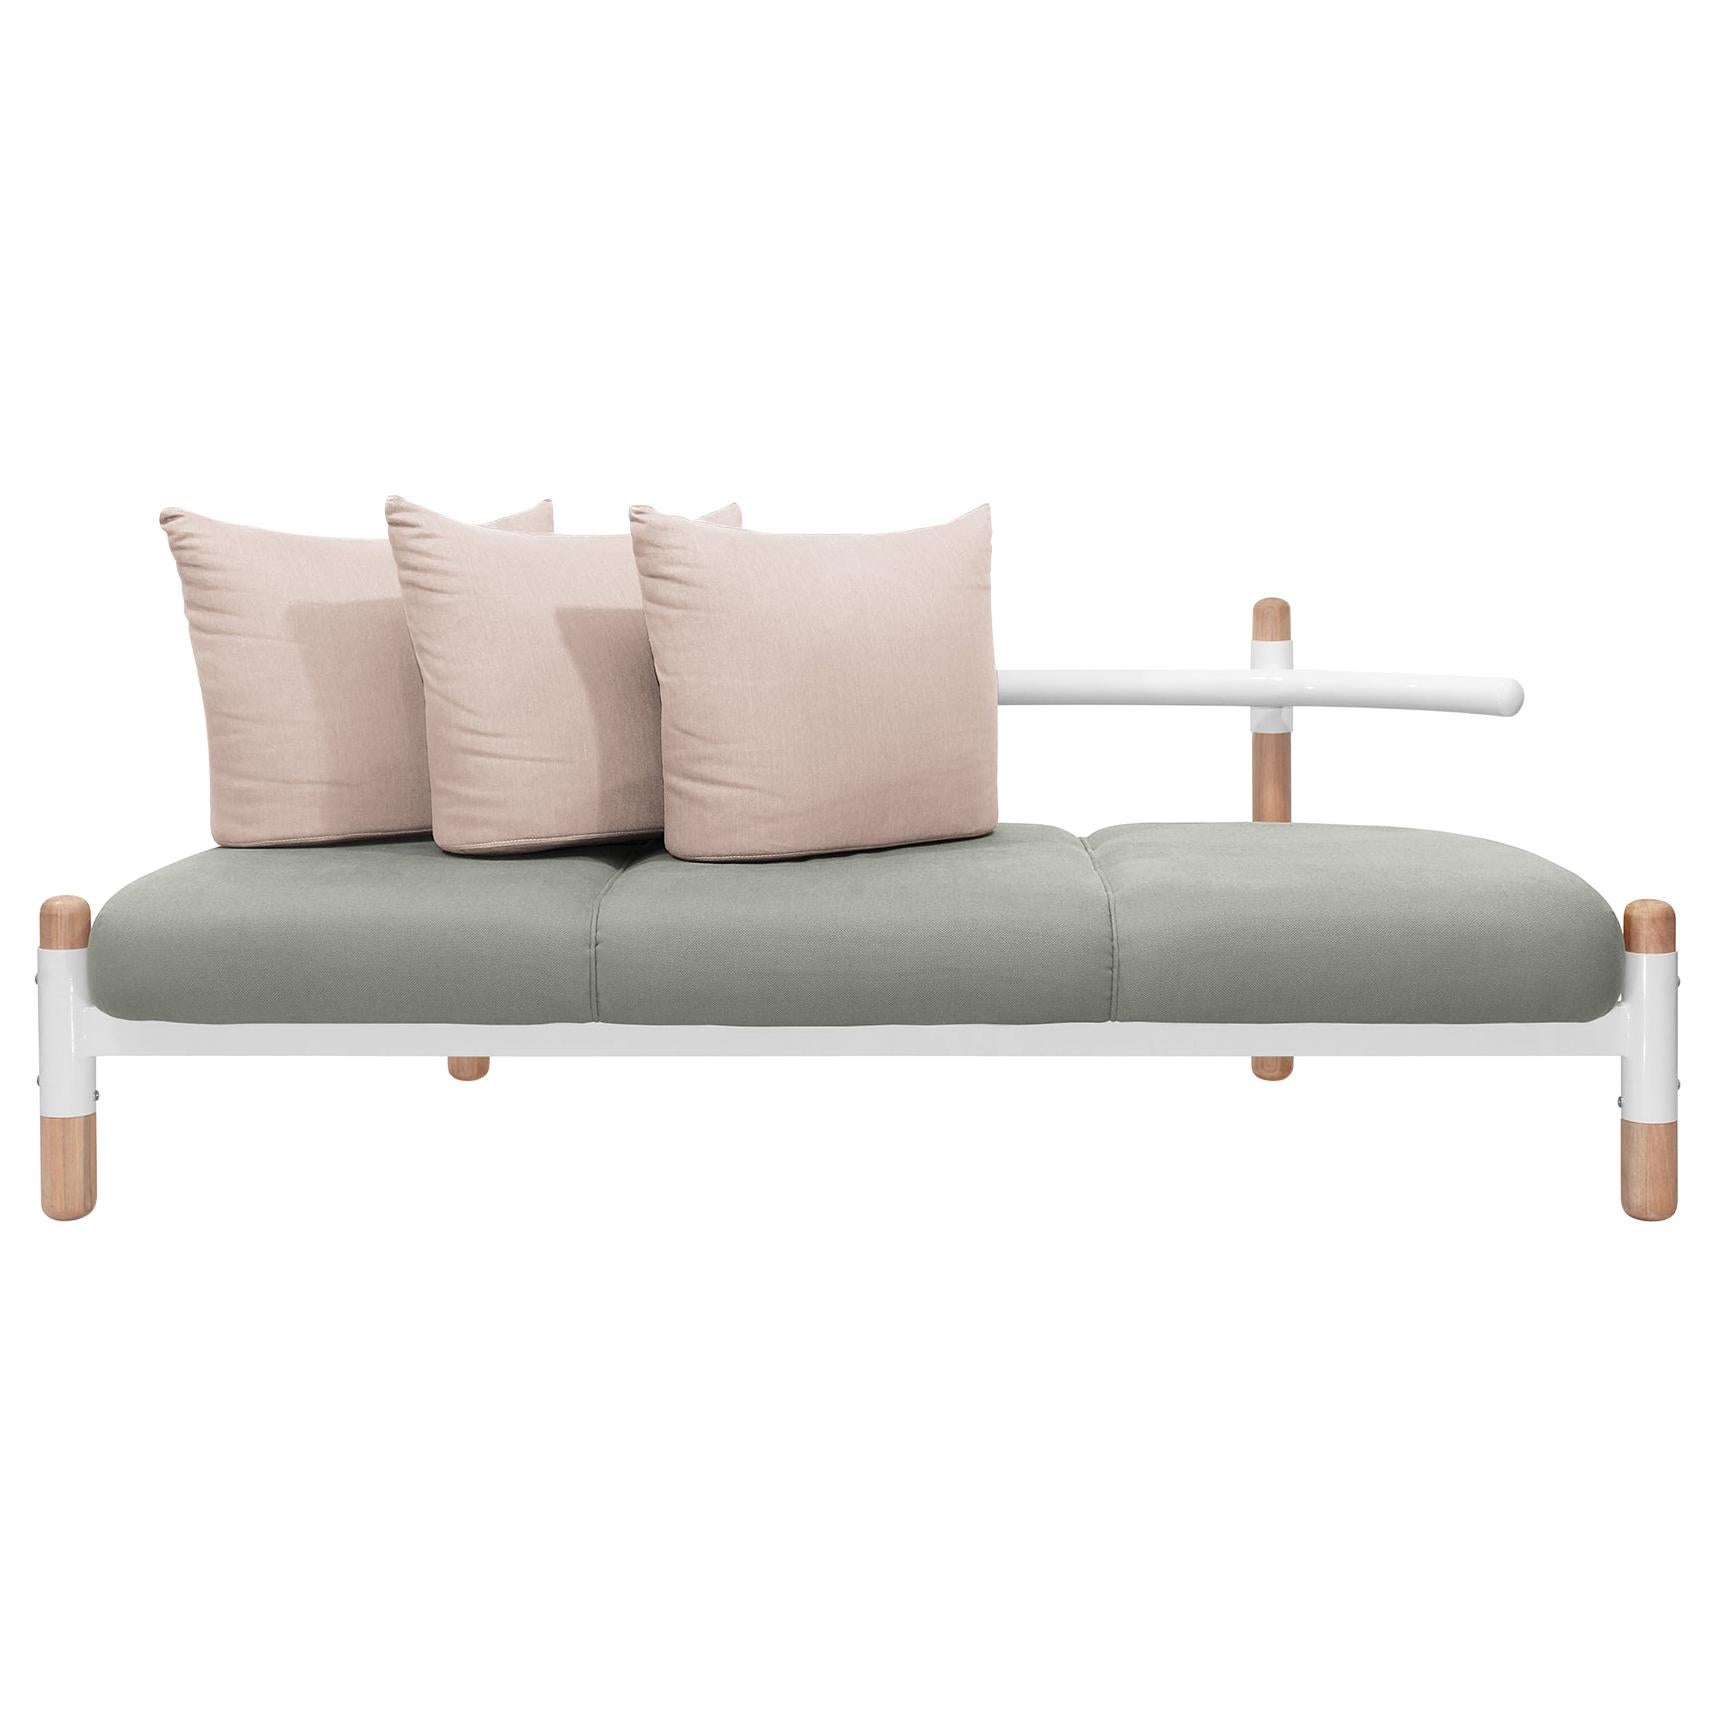 Grey PK15 Three-Seat Sofa, Carbon Steel Structure and Wood Legs by Paulo Kobylka For Sale